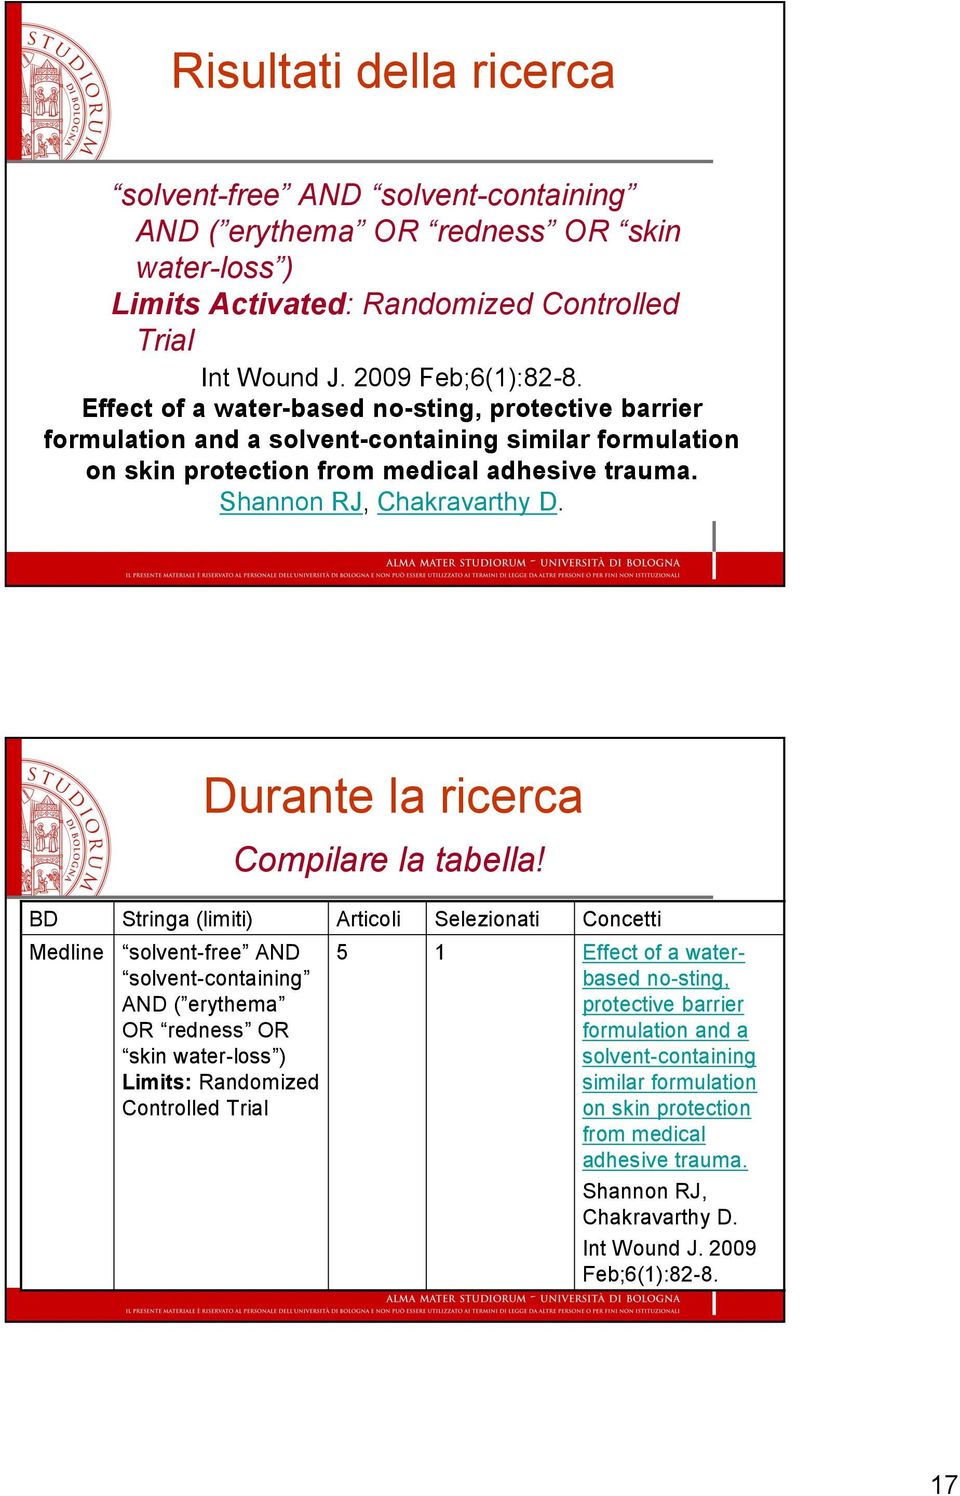 BD Medline Stringa (limiti) Durante la ricerca solvent-free AND solvent-containing AND ( erythema OR redness OR skin water-loss ) Limits: Randomized Controlled Trial Compilare la tabella!